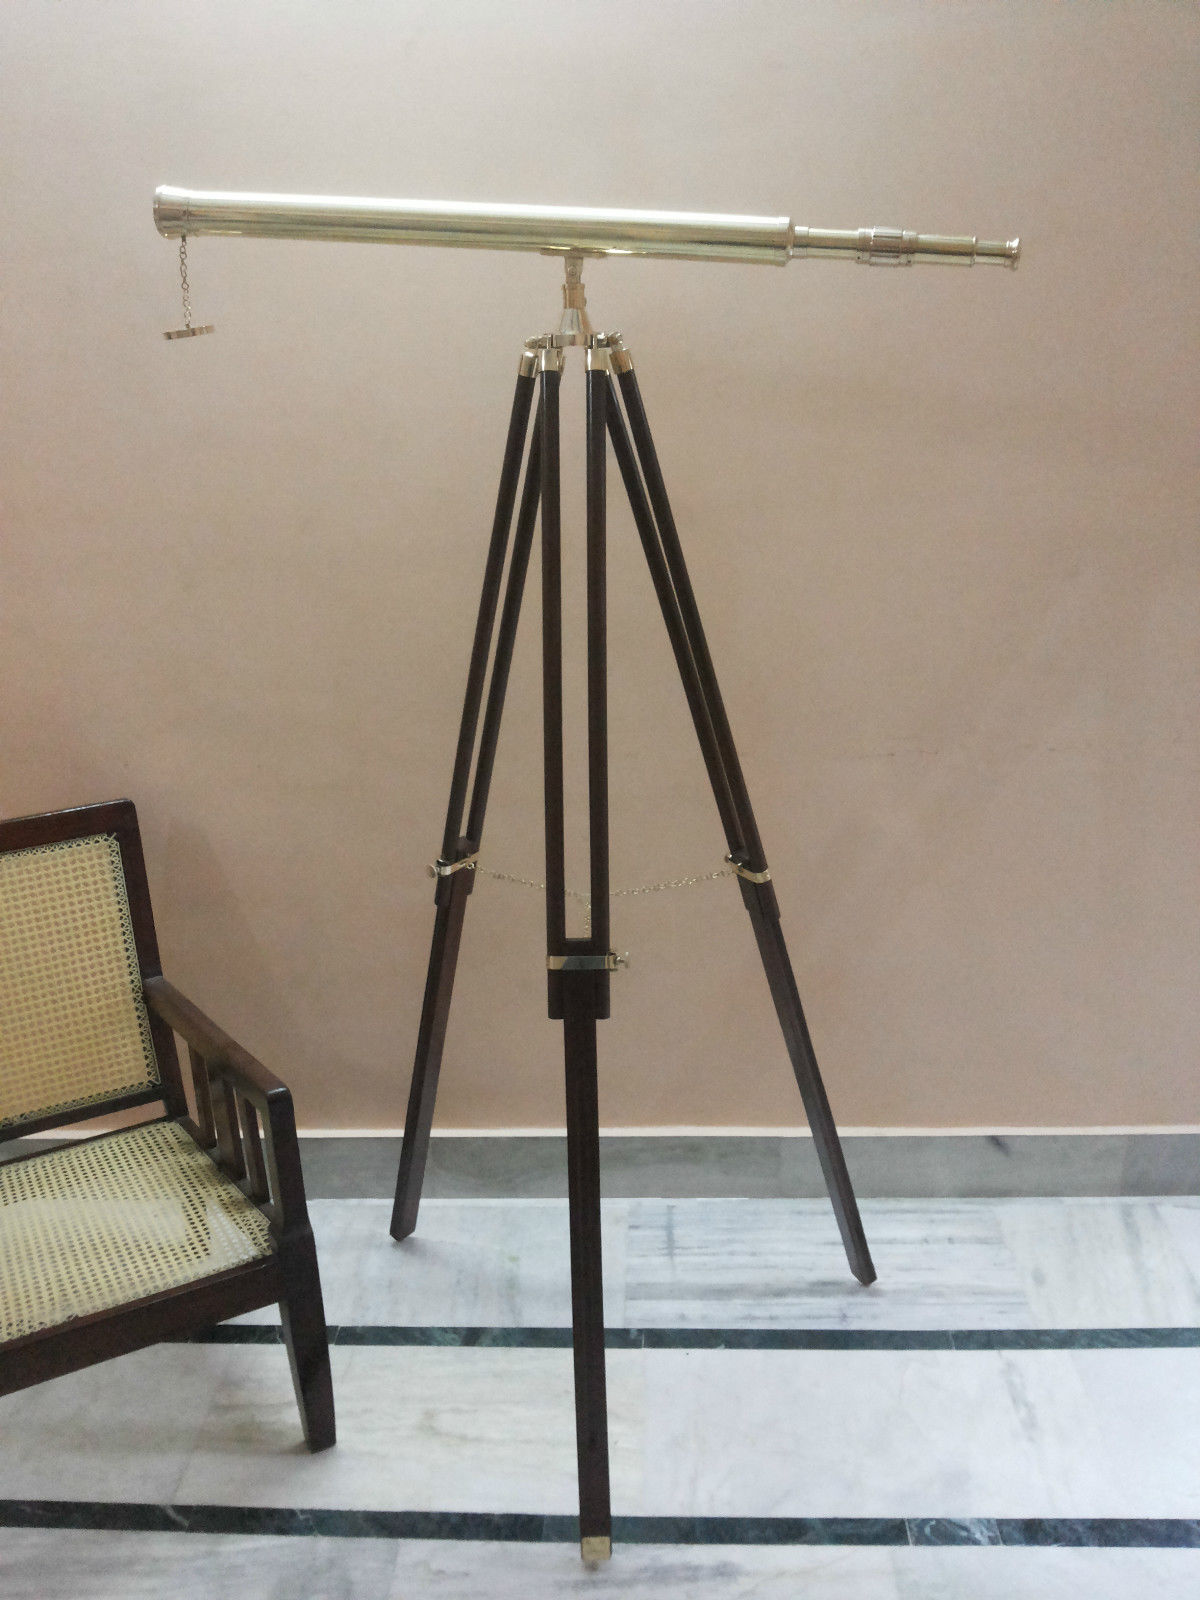 ANTIQUE BRASS TELESCOPE WITH WOODEN TRIPOD STAND MARITIME NAUTICAL DECOR